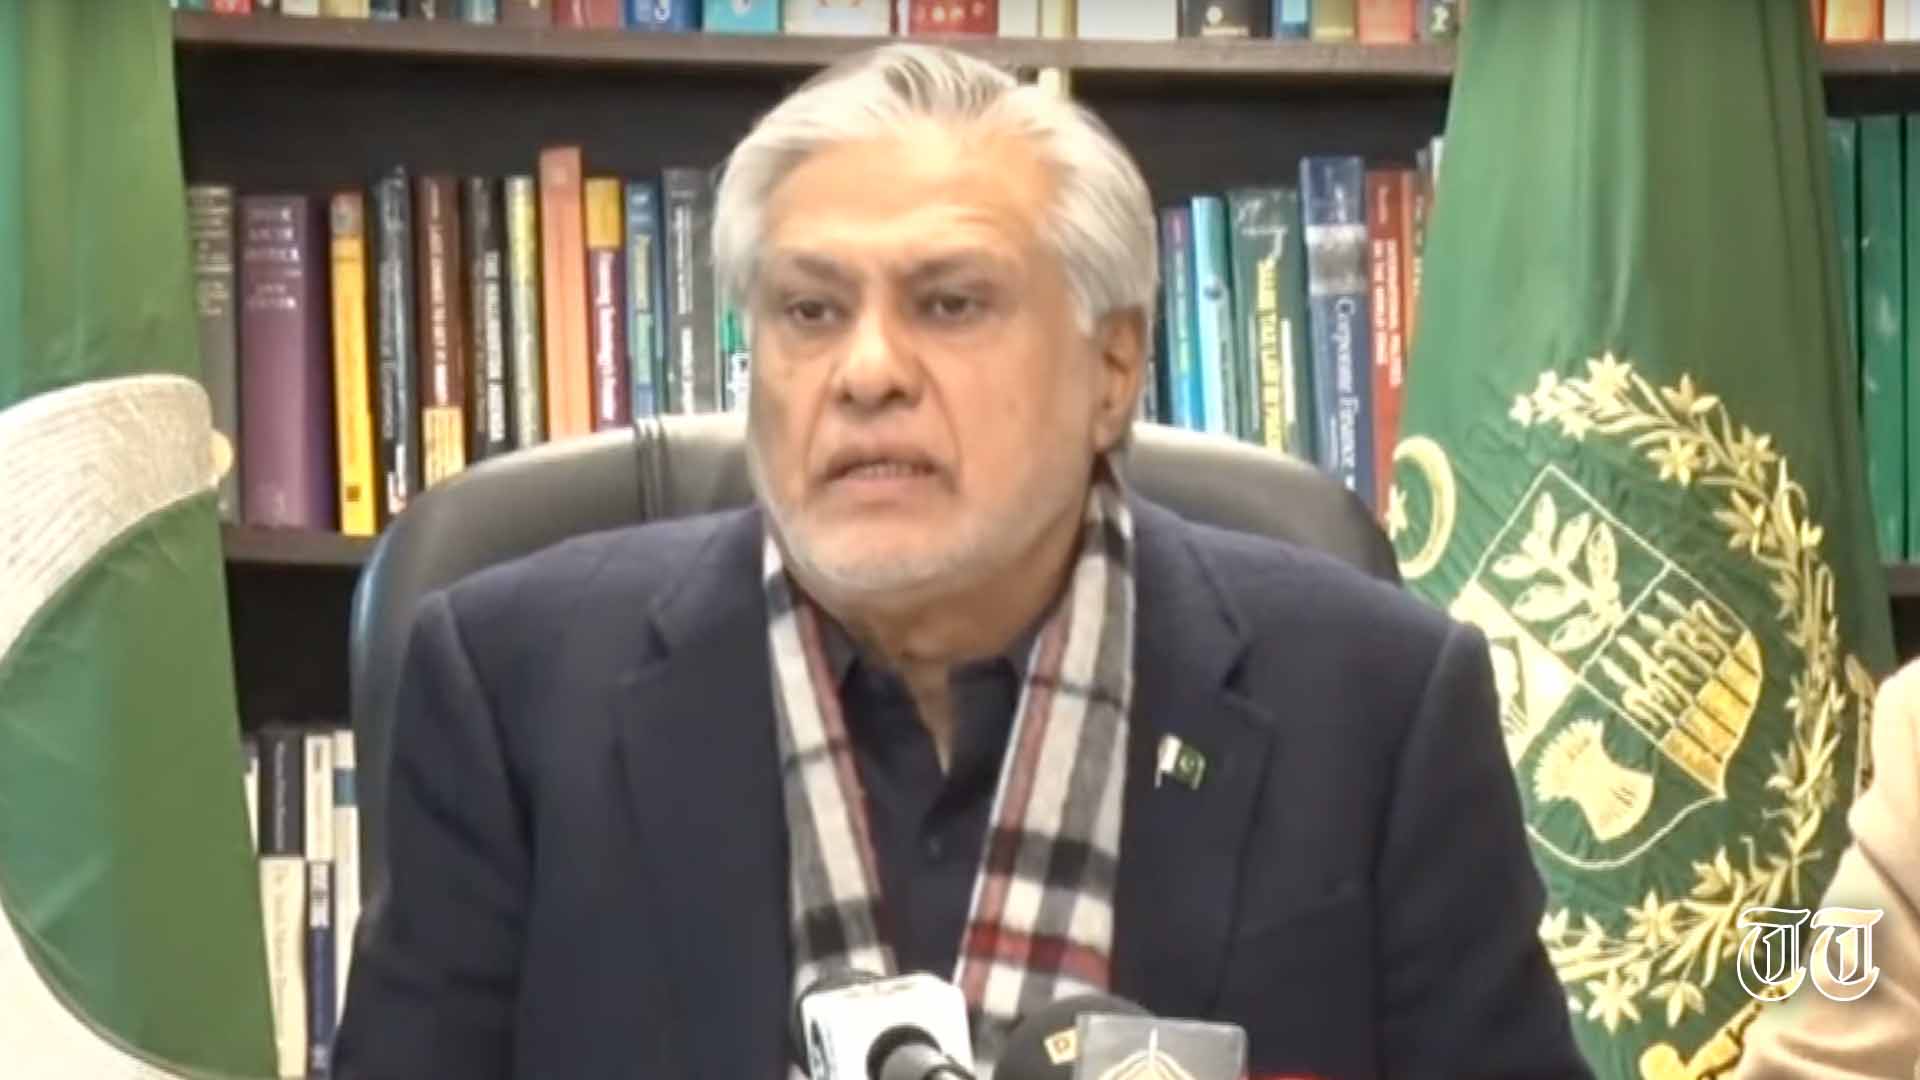 A file photo is shown of foreign minister Ishaq Dar speaking to the press.